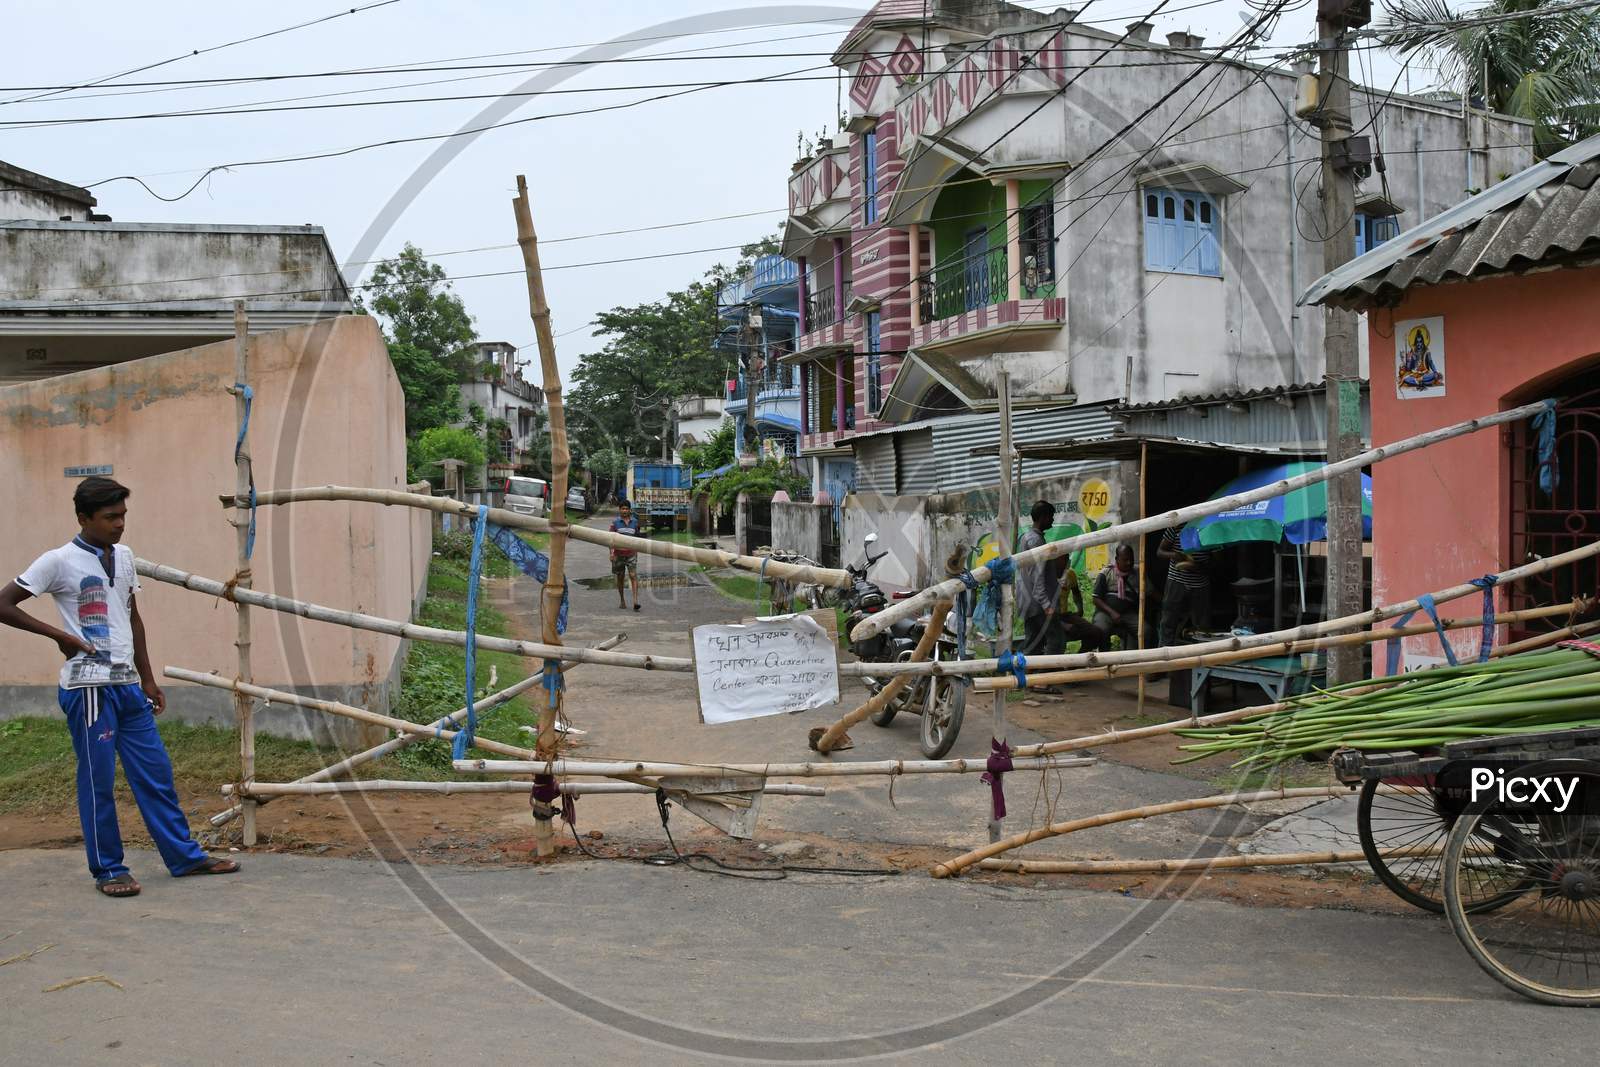 Local residents have barricaded the road in front of the school with bamboo to prevent it from being used as a Novel Coronavirus (COVID-19) related quarantine center at a school in Burdwan Town.